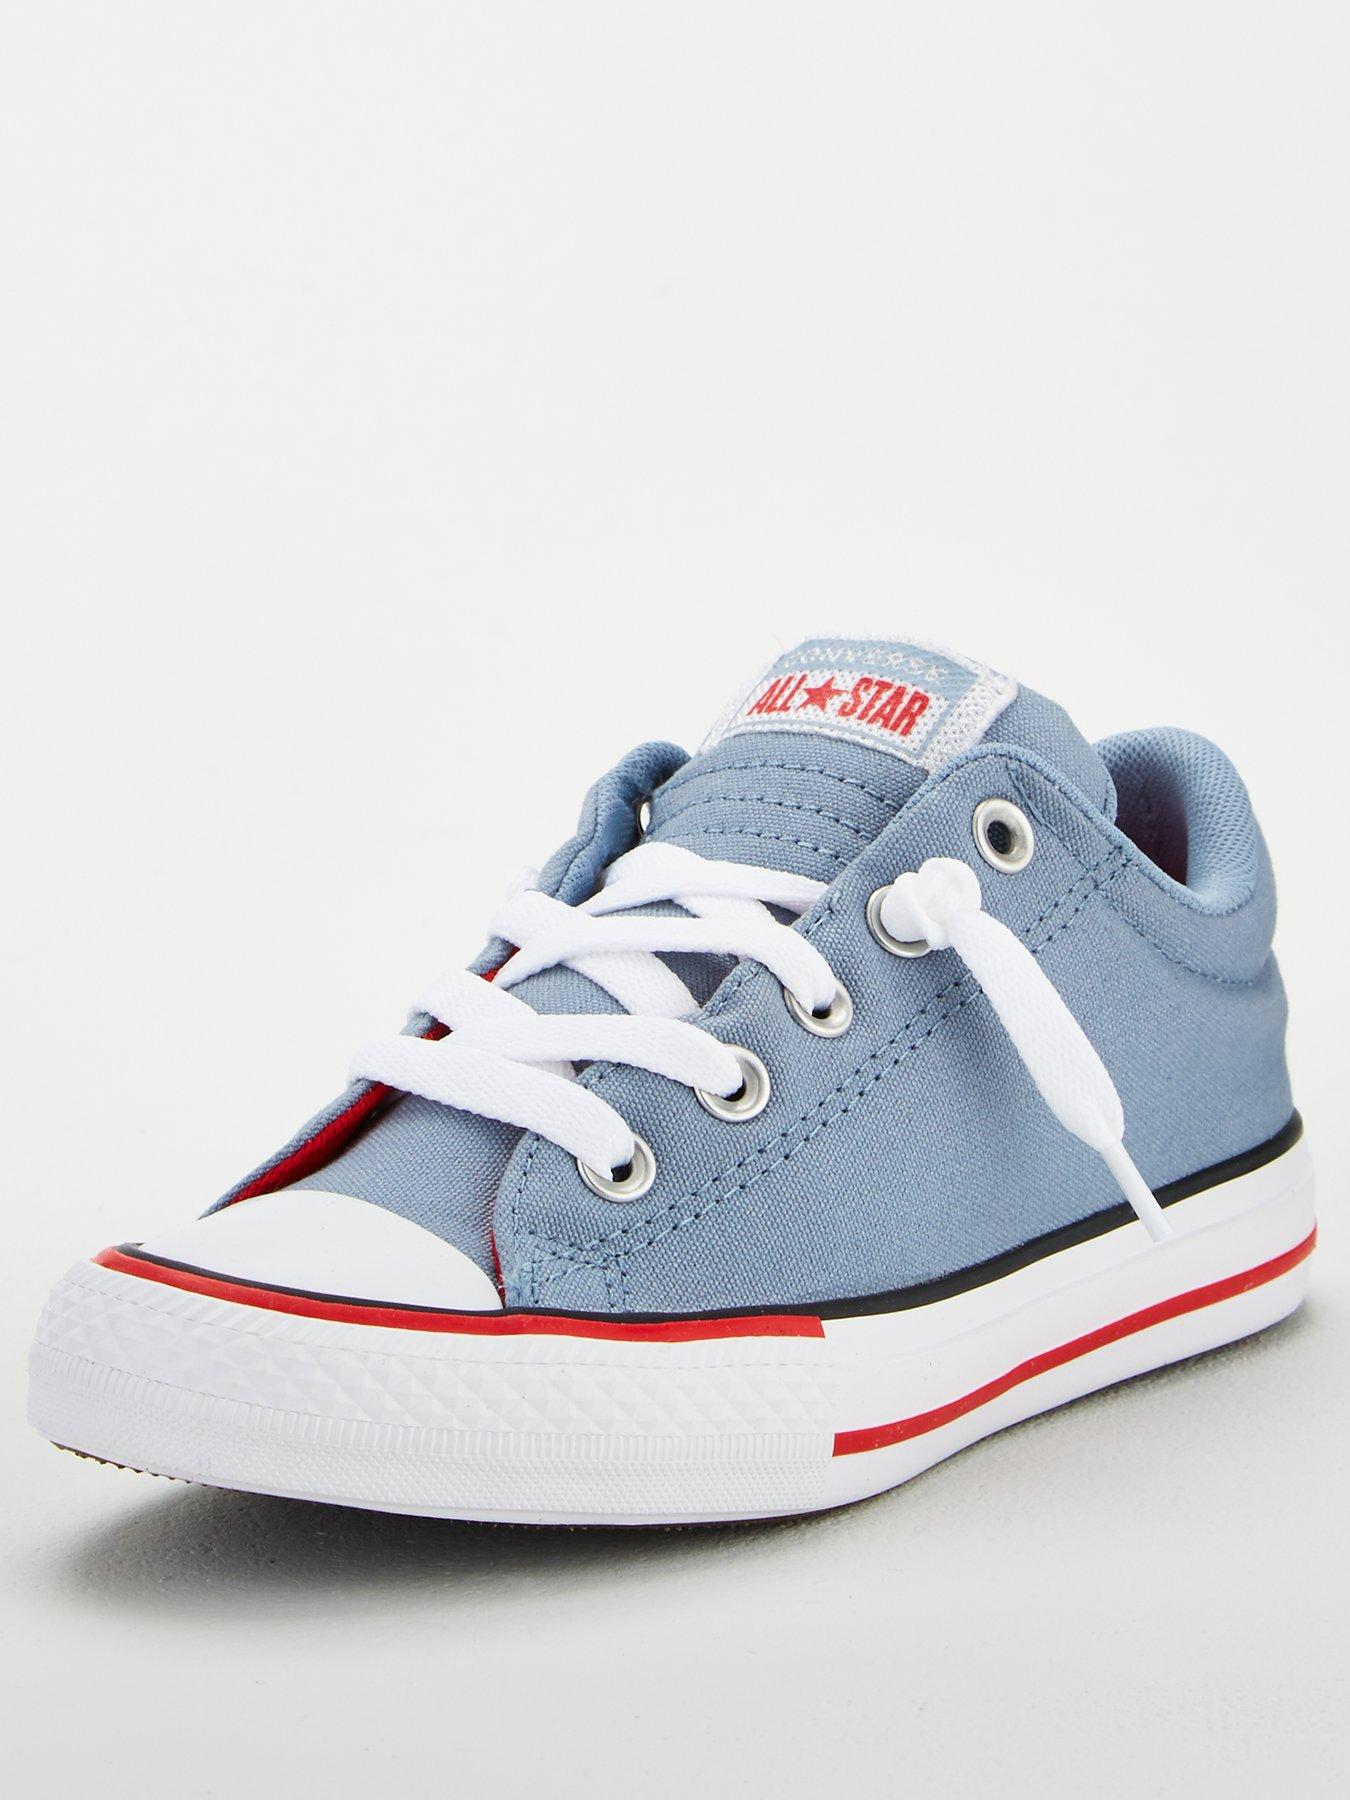 where to buy kids converse shoes